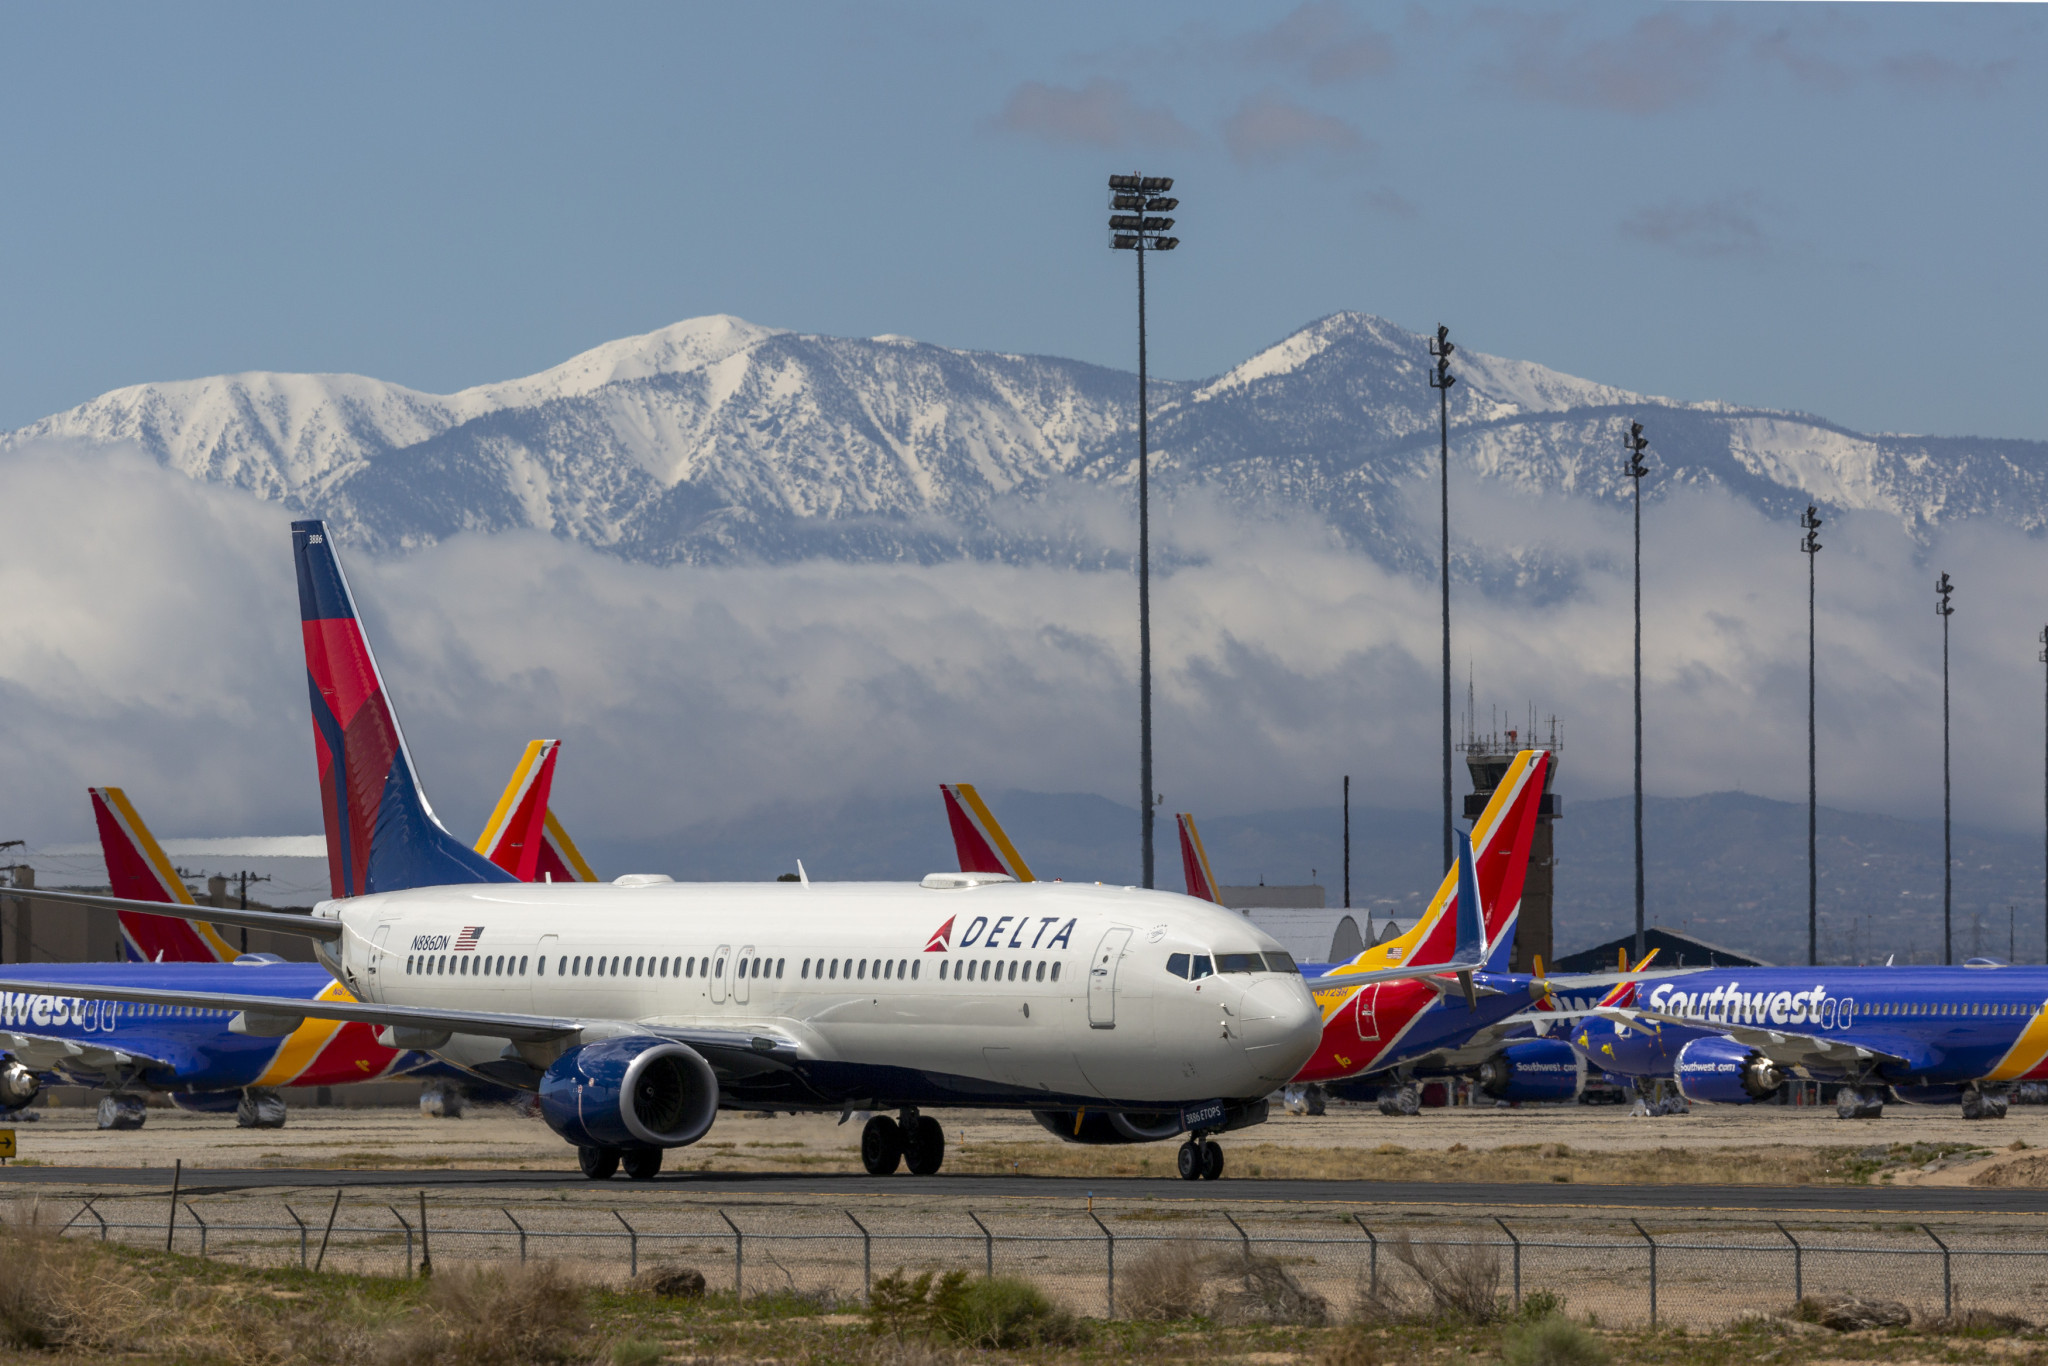 Delta Air Lines has announced huge losses just weeks after joining as a Los Angeles 2028 sponsor ©Getty Images